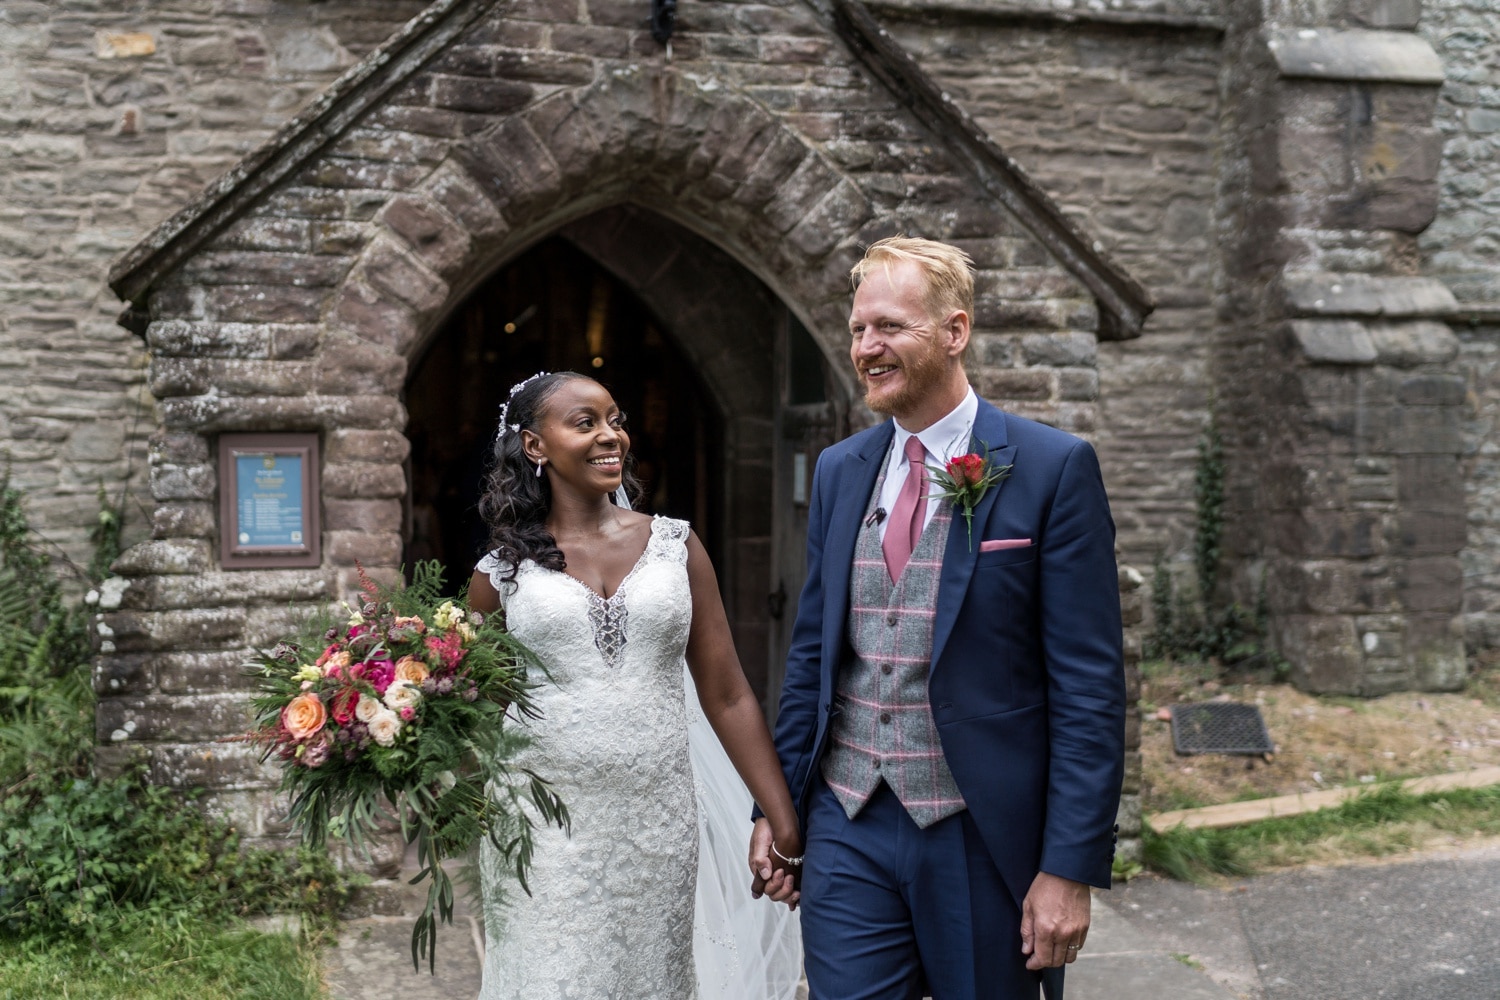 Marriage ceremony at St Edmund's Church in Crickhowell, South Wales